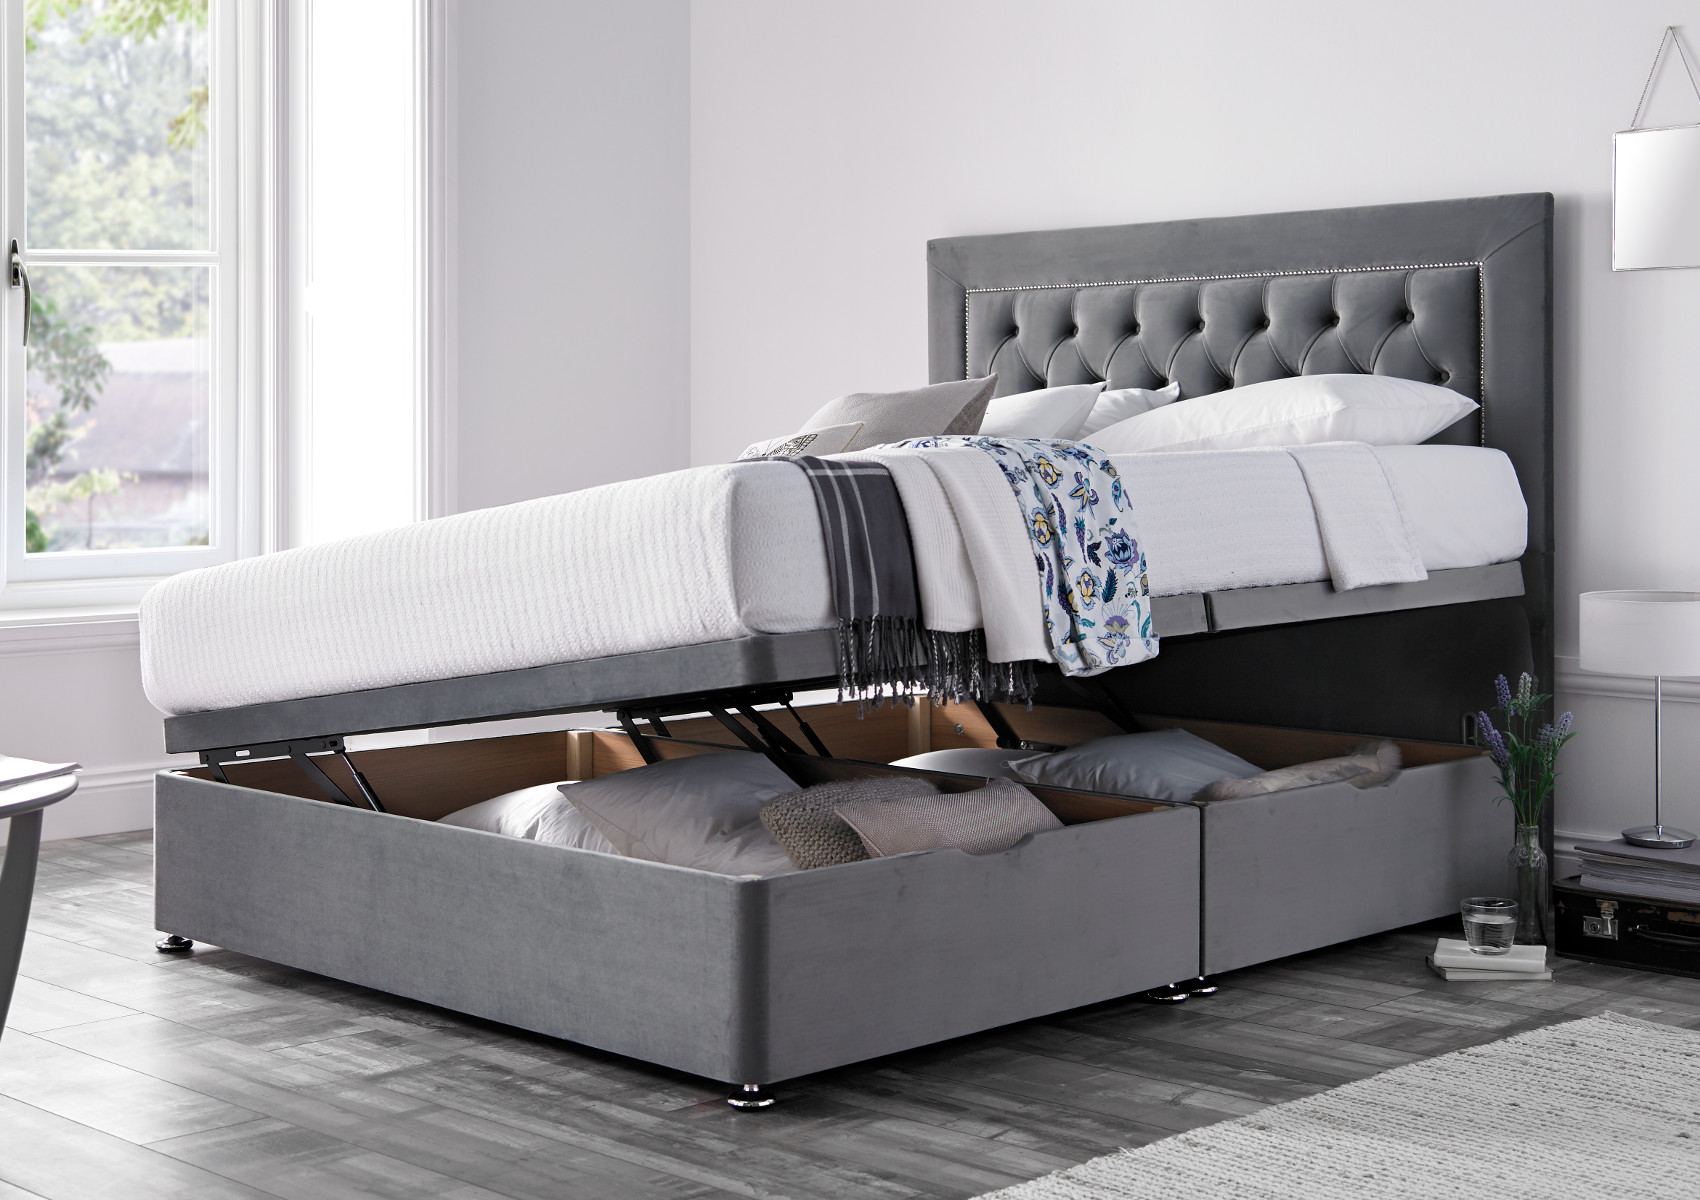 View Woodstock Naples Silver Upholstered Double Ottoman Bed Time4Sleep information